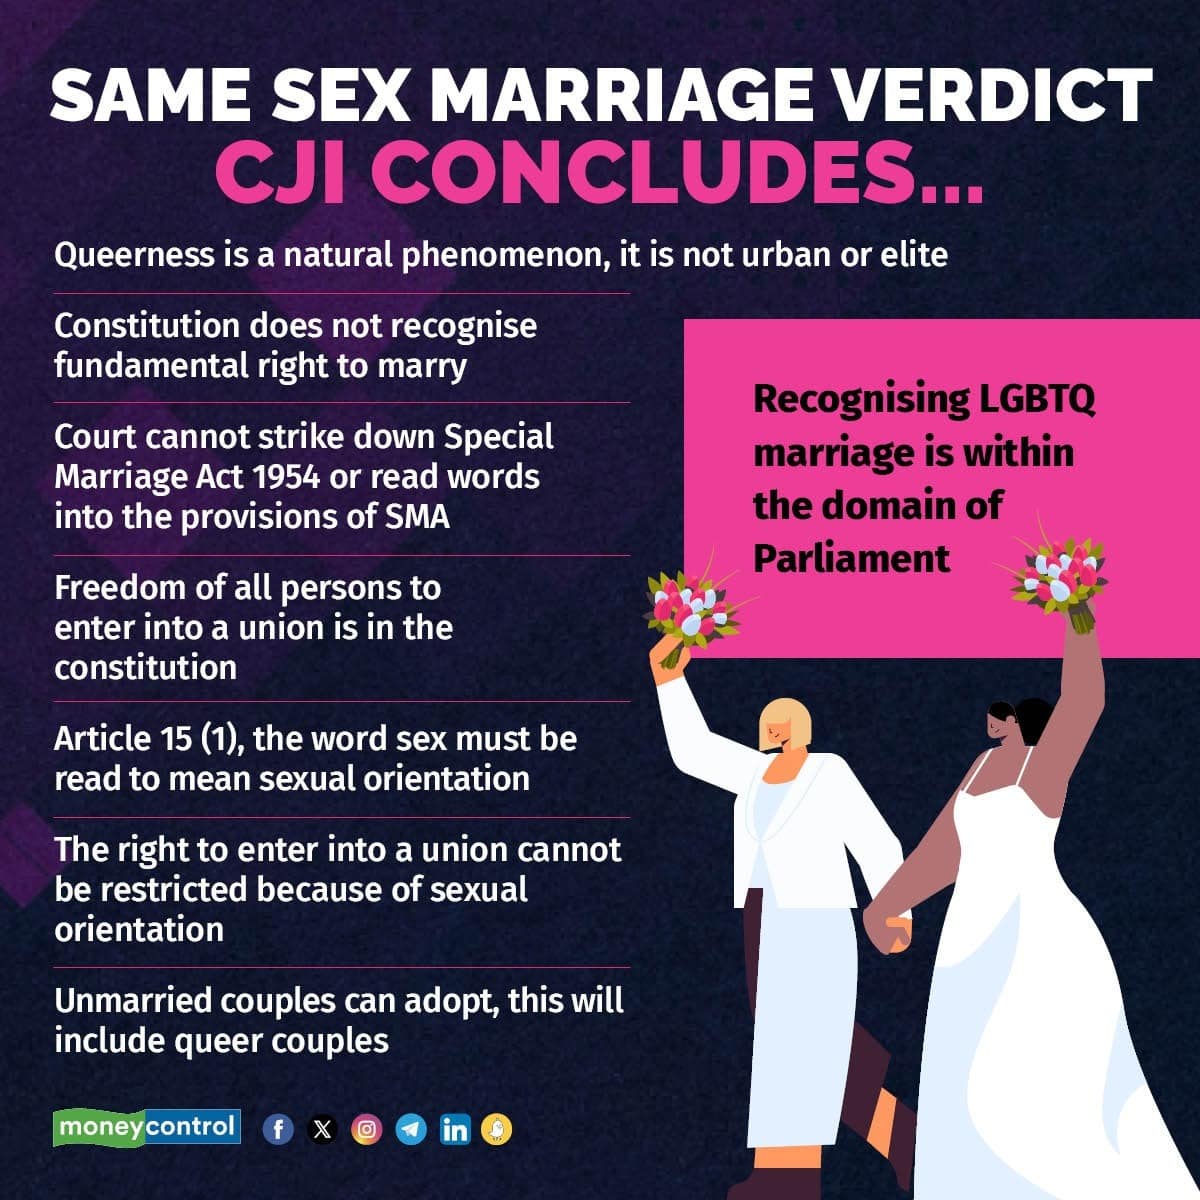 Same Sex Marriage Supreme Court Refuses To Recognise Same Sex Marriage Calls It The Domain Of